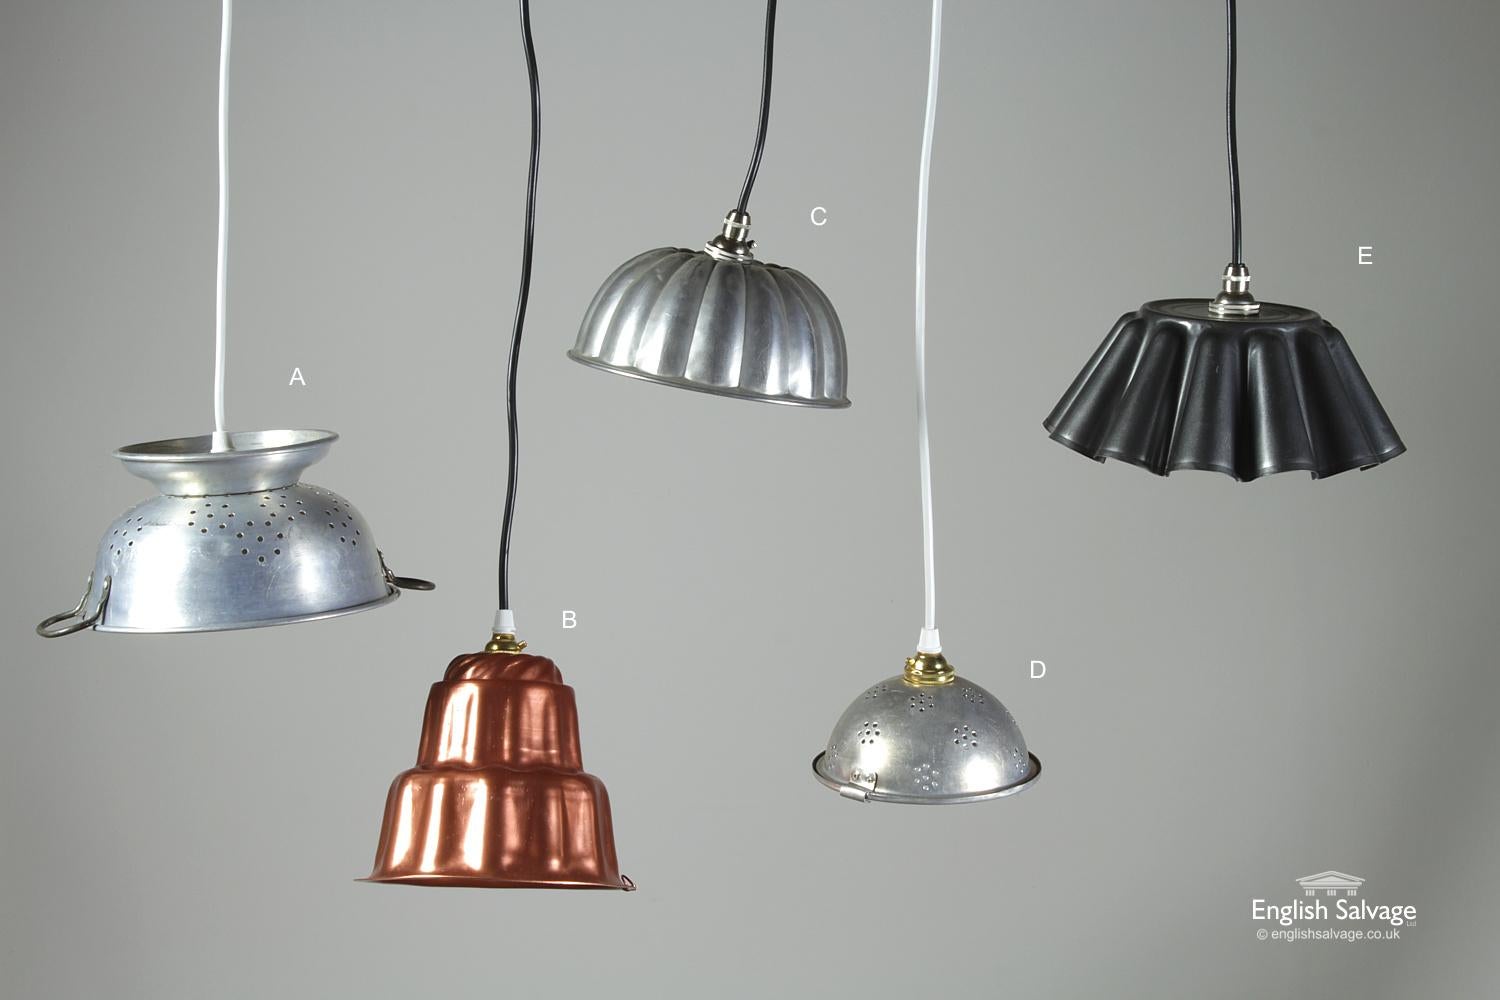 Great selection of pendant lights all made from vintage / repurposed kitchen items / utensils. Grouped together or singly, these would make a fabulous lighting display in the home, restaurant, bar or pub. All appear to have been newly wired (not